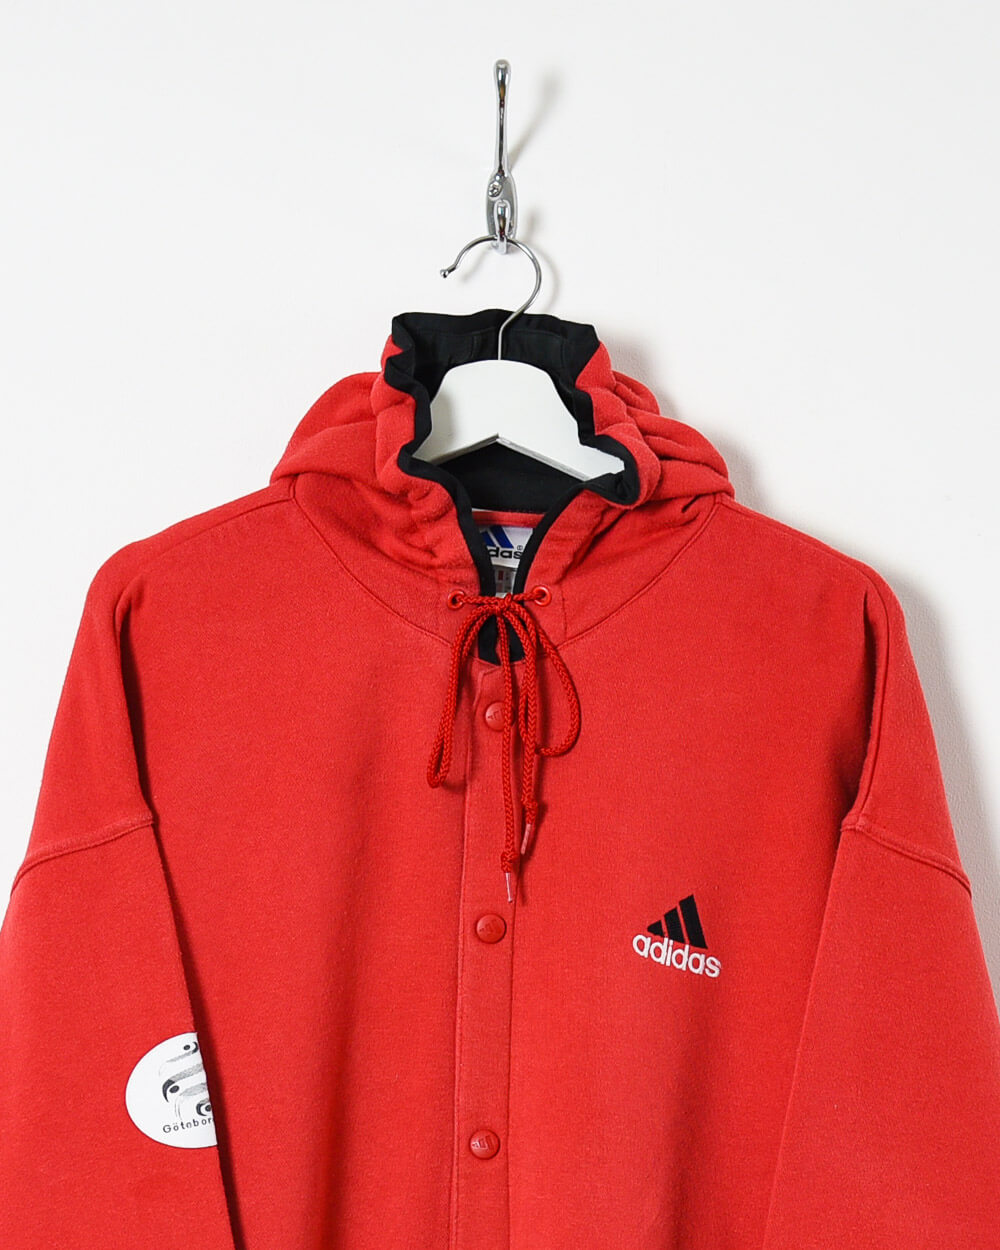 Adidas Hoodie - Large - Domno Vintage 90s, 80s, 00s Retro and Vintage Clothing 